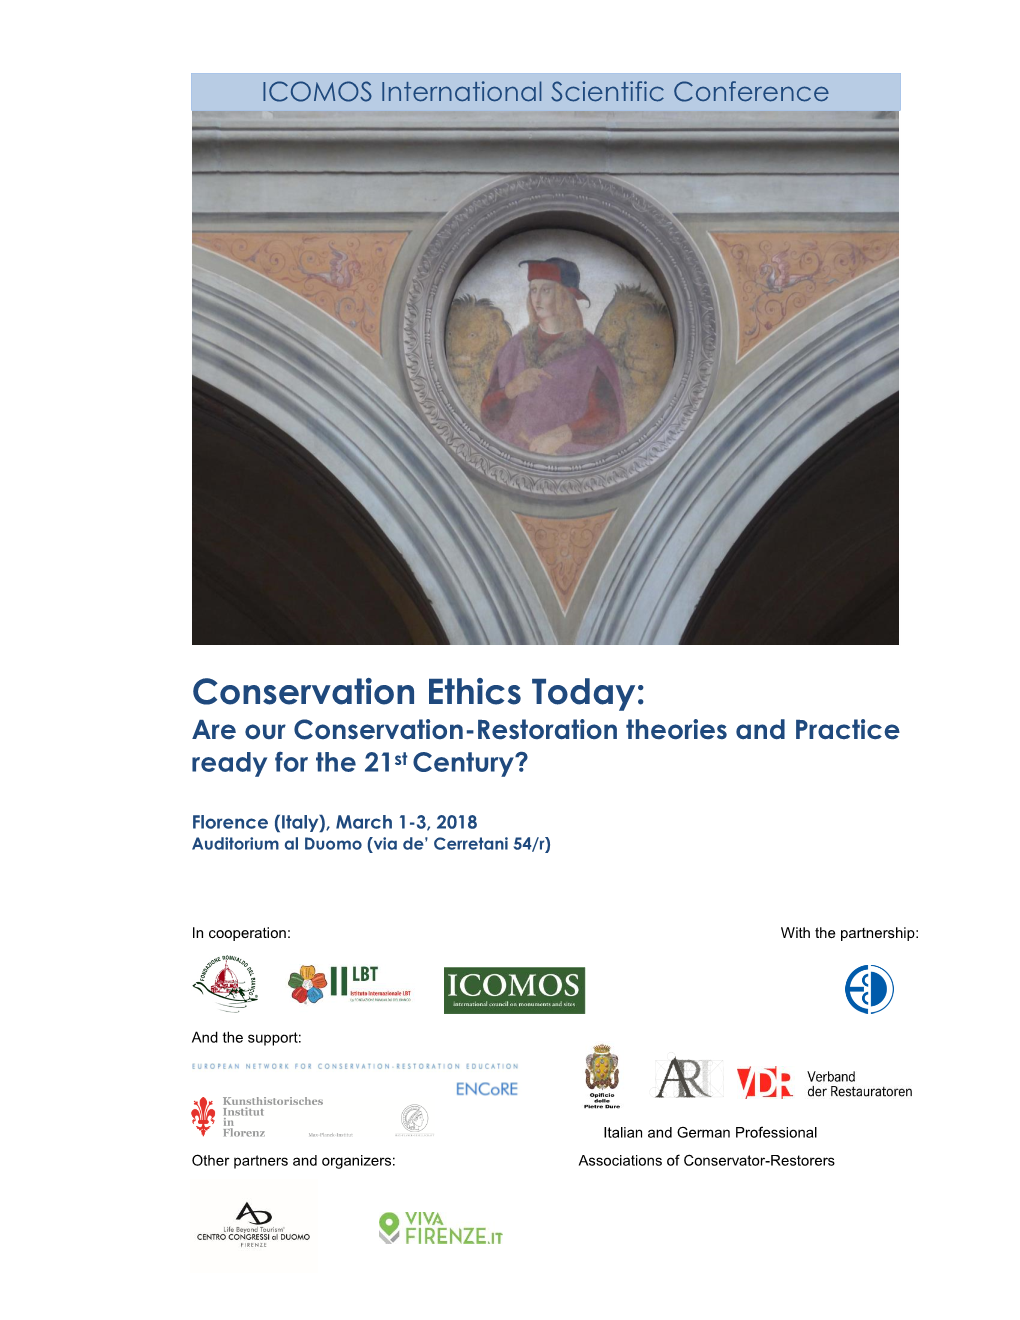 Conservation Ethics Today: Are Our Conservation-Restoration Theories and Practice Ready for the 21St Century?